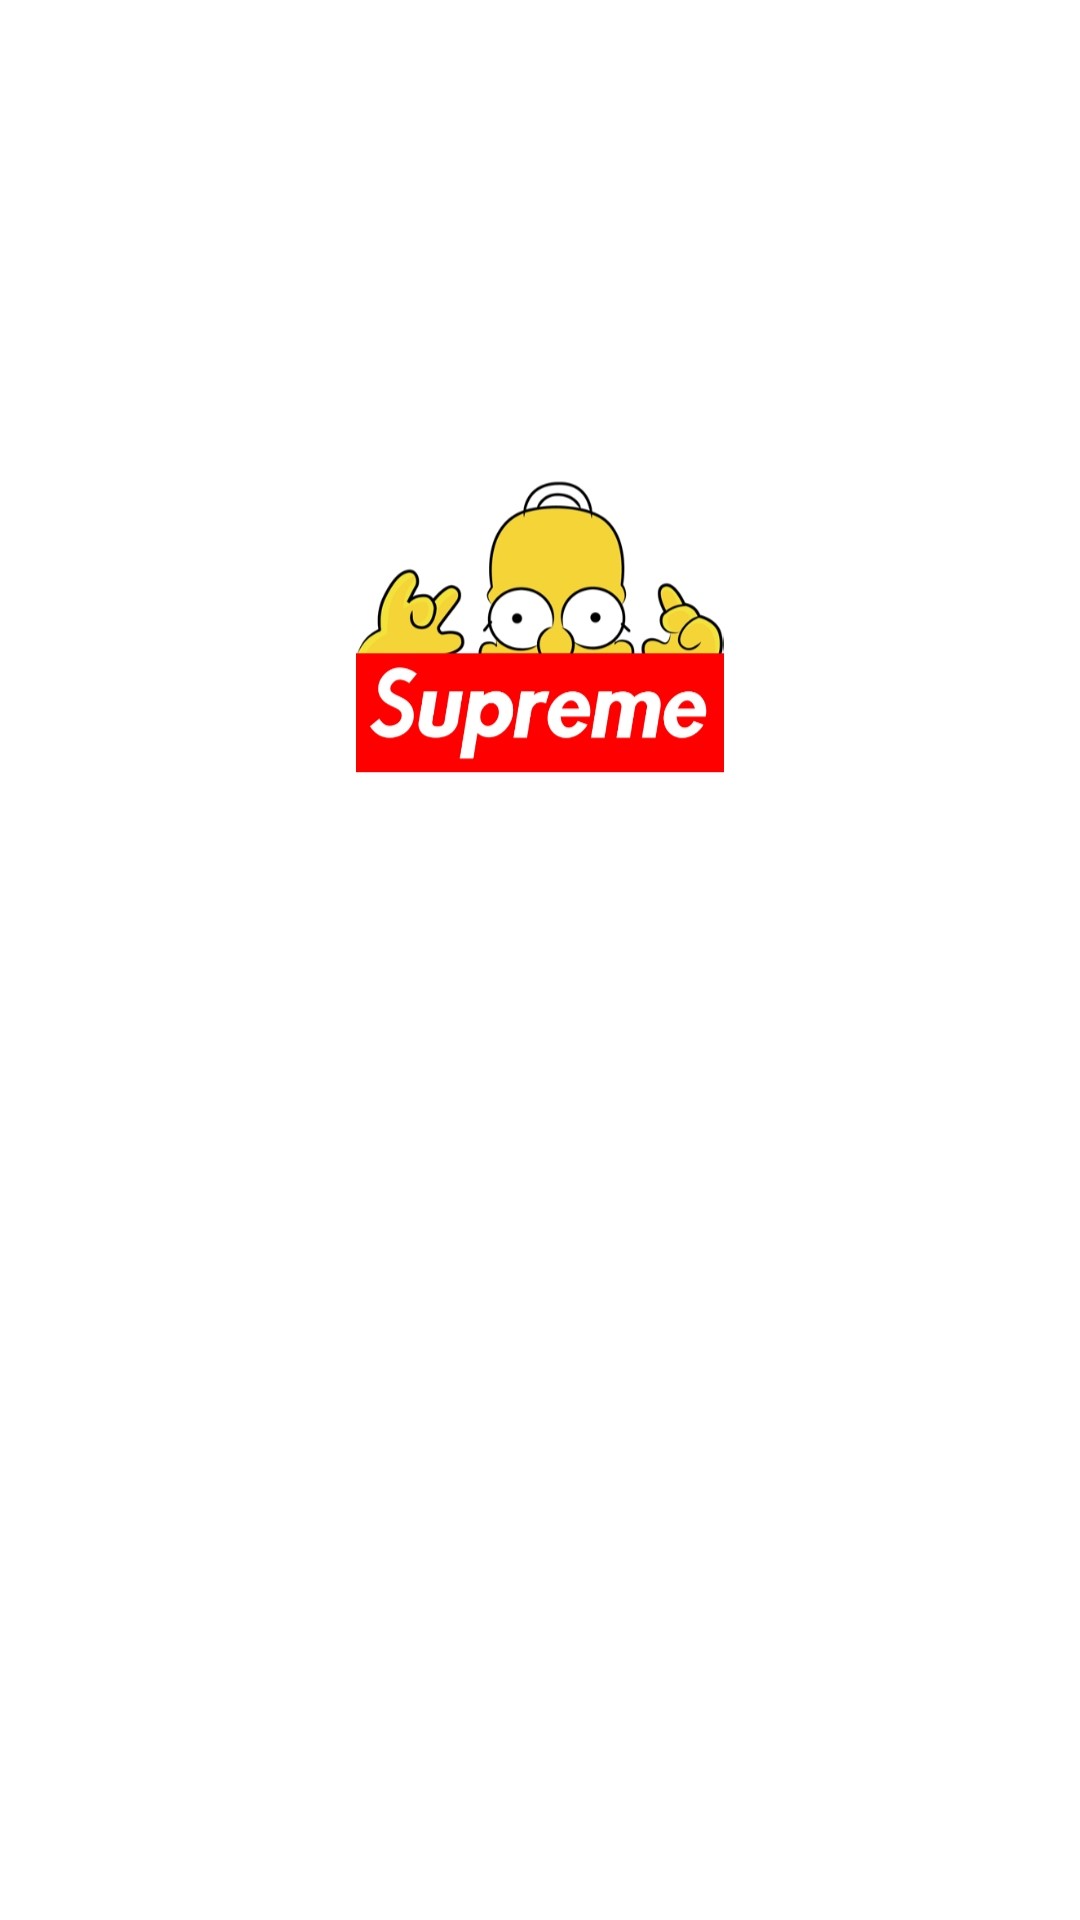 wallpaper simpsons supreme   Image by Min Sae Yeon 1080x1920